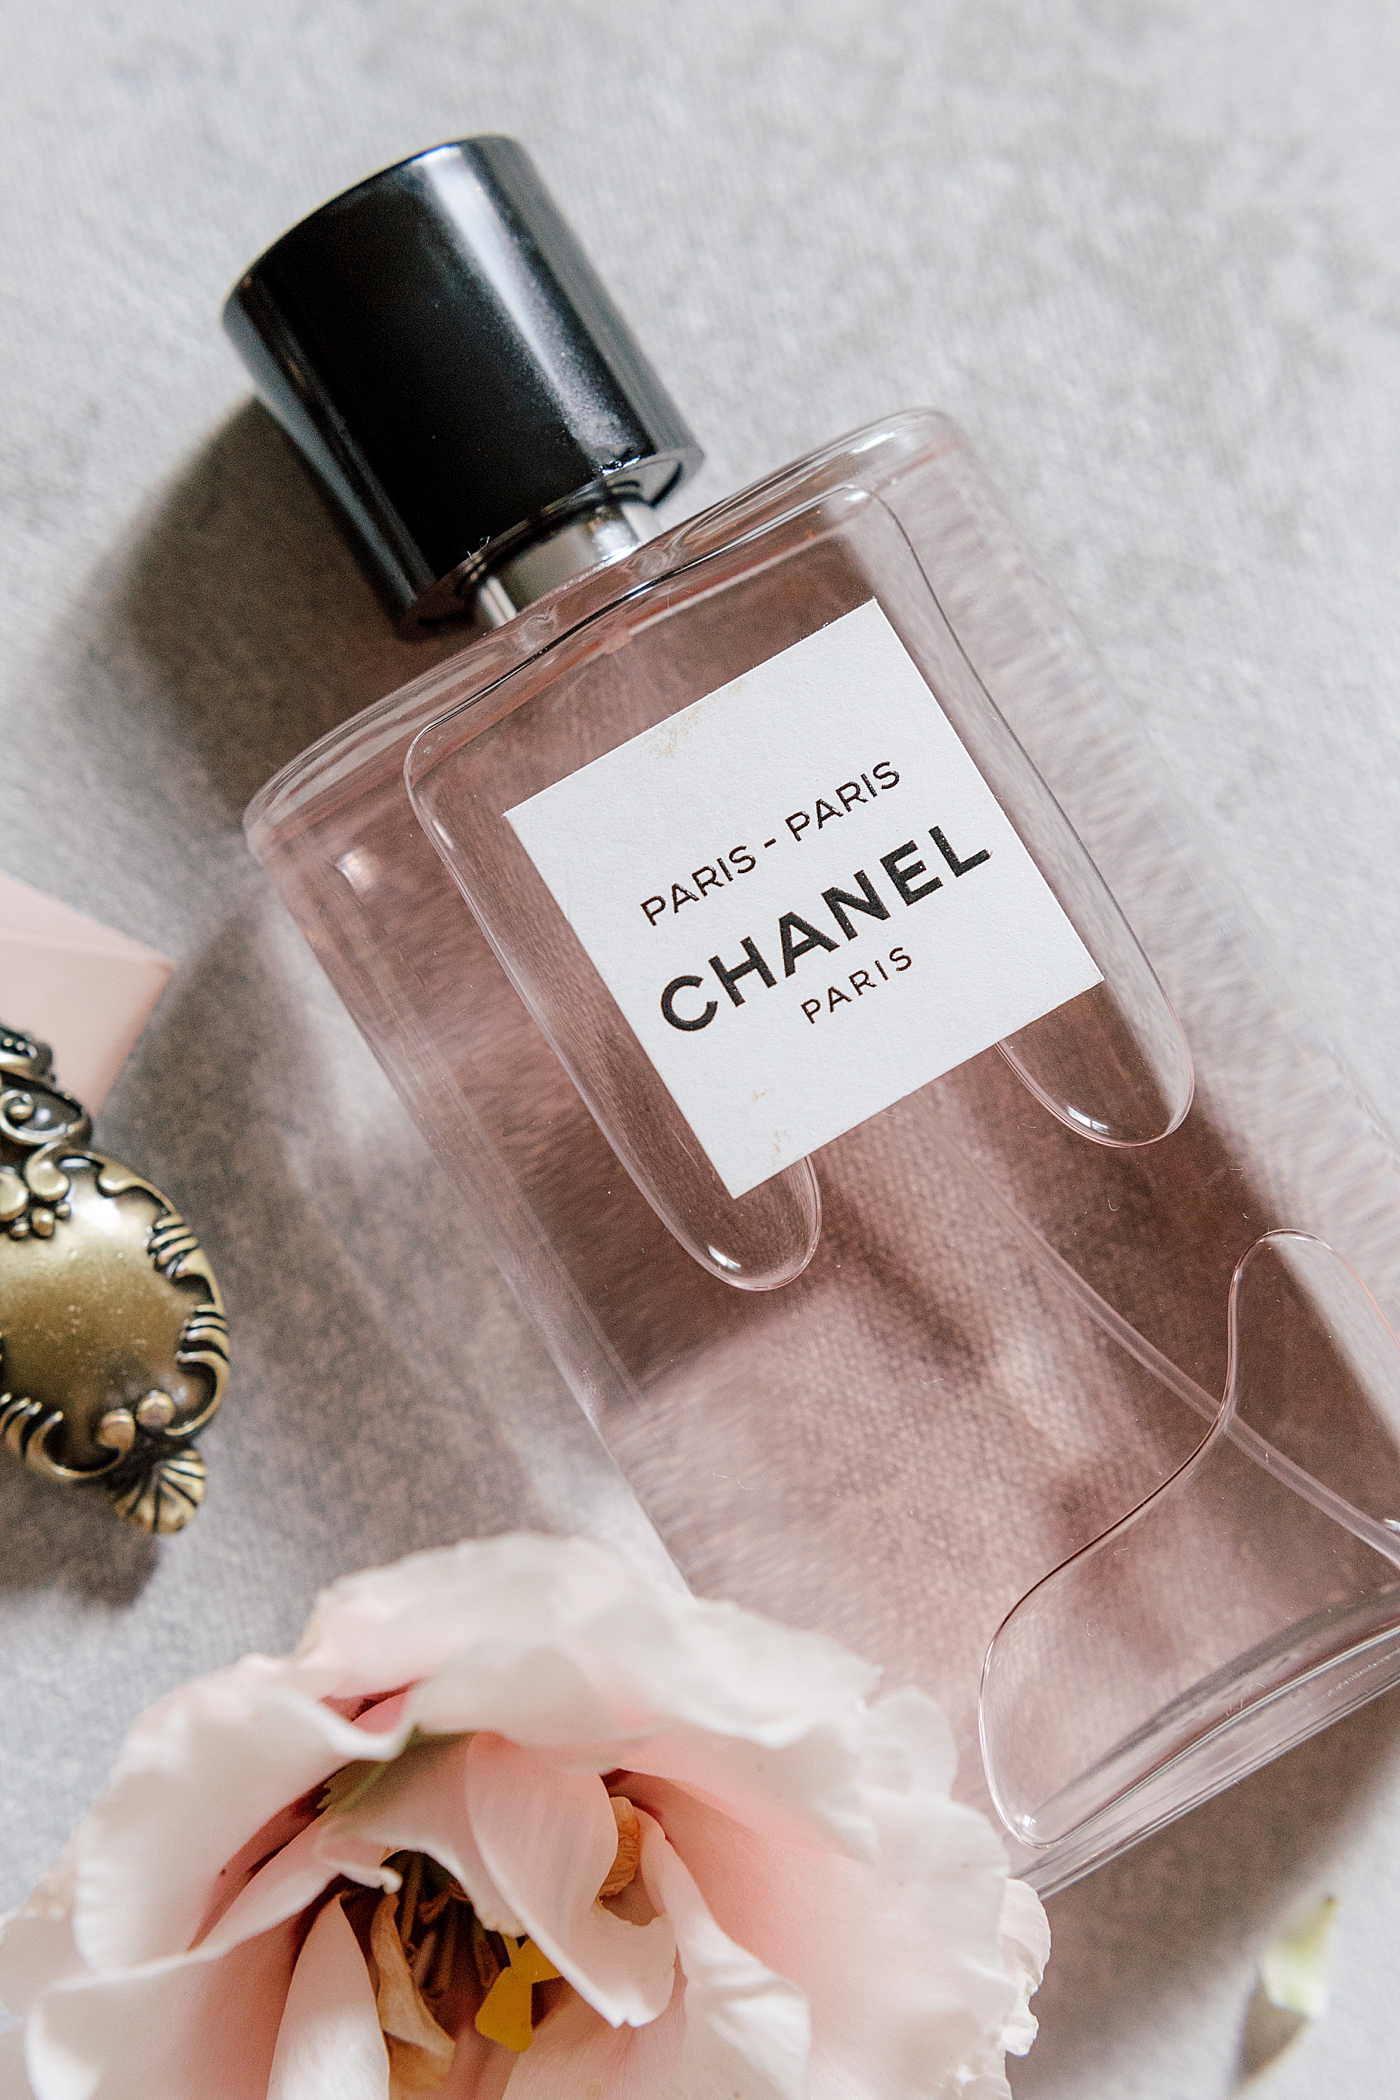 Pink perfume bottle | Image by Hope Helmuth Photography